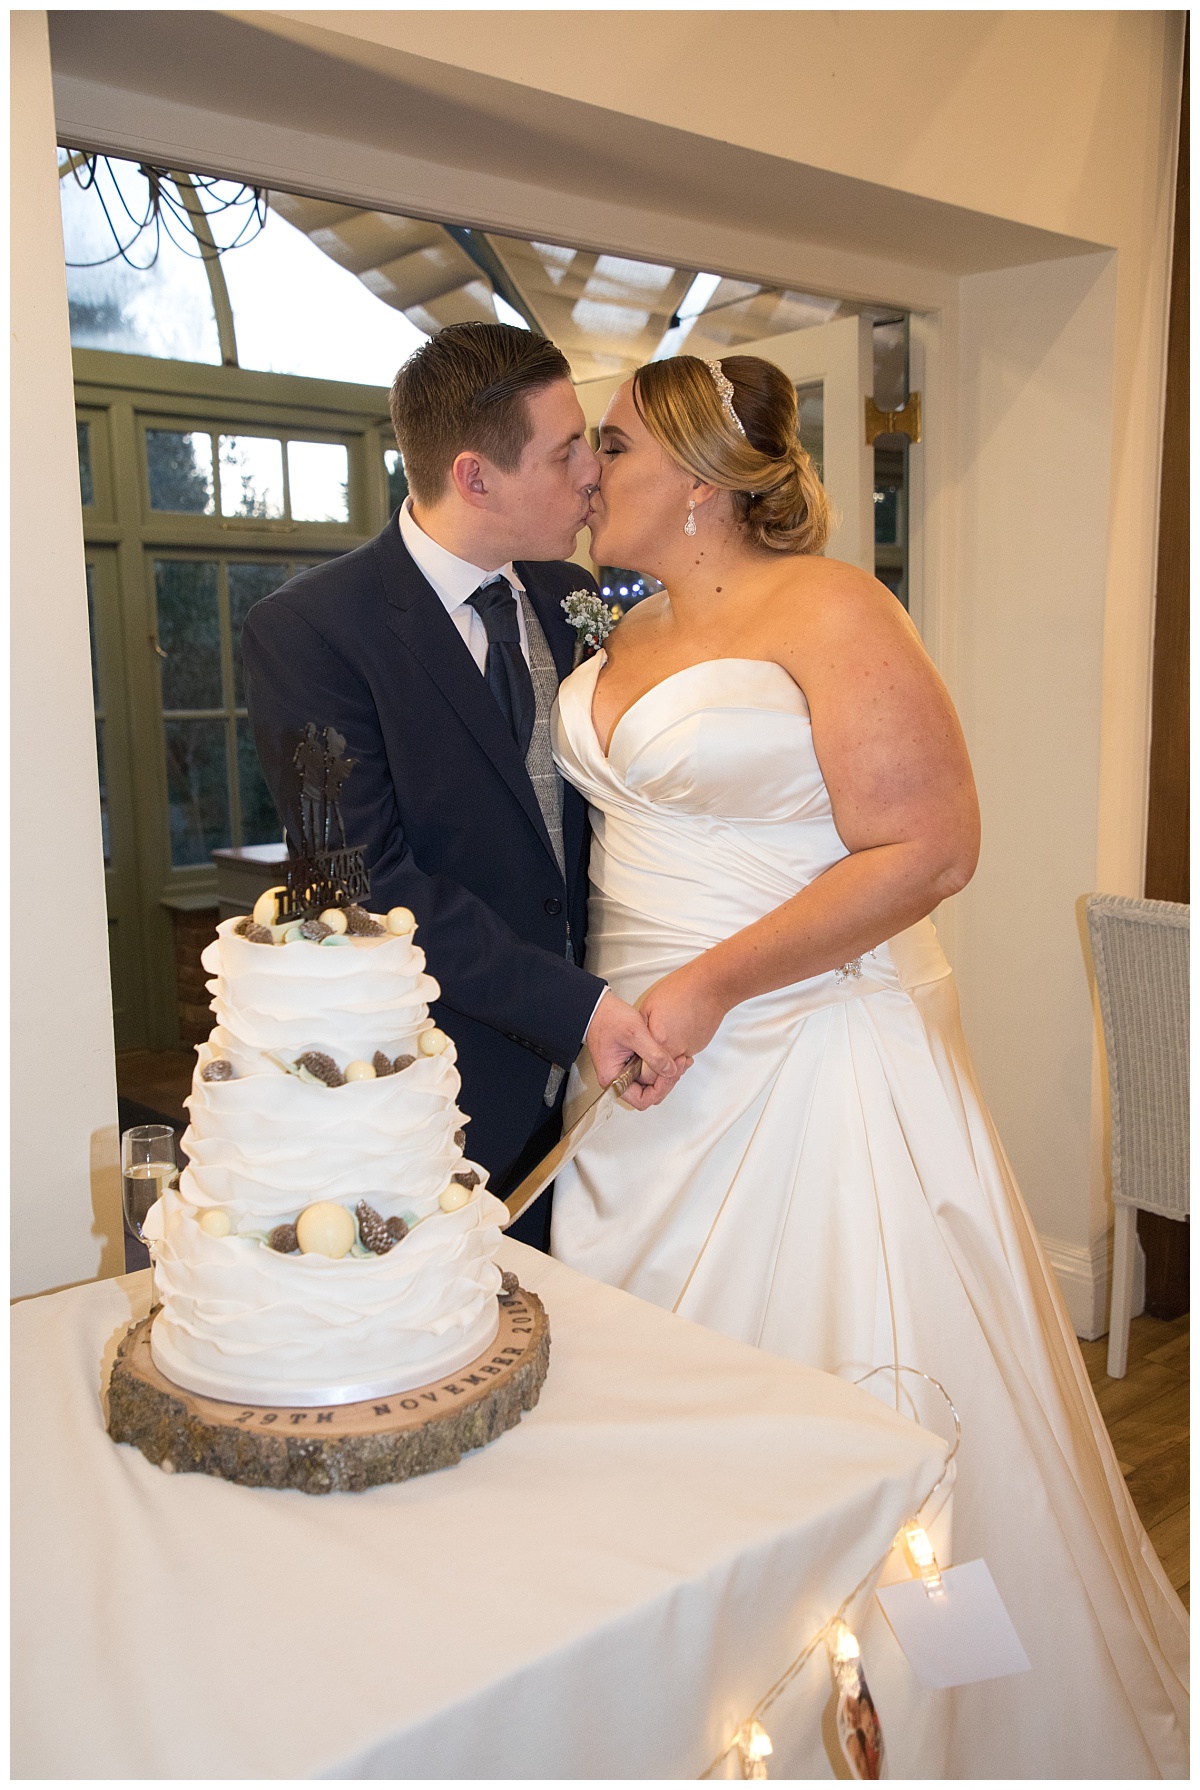 Lorna and Vinny's Abbeywood Estate and Gardens Wedding 101